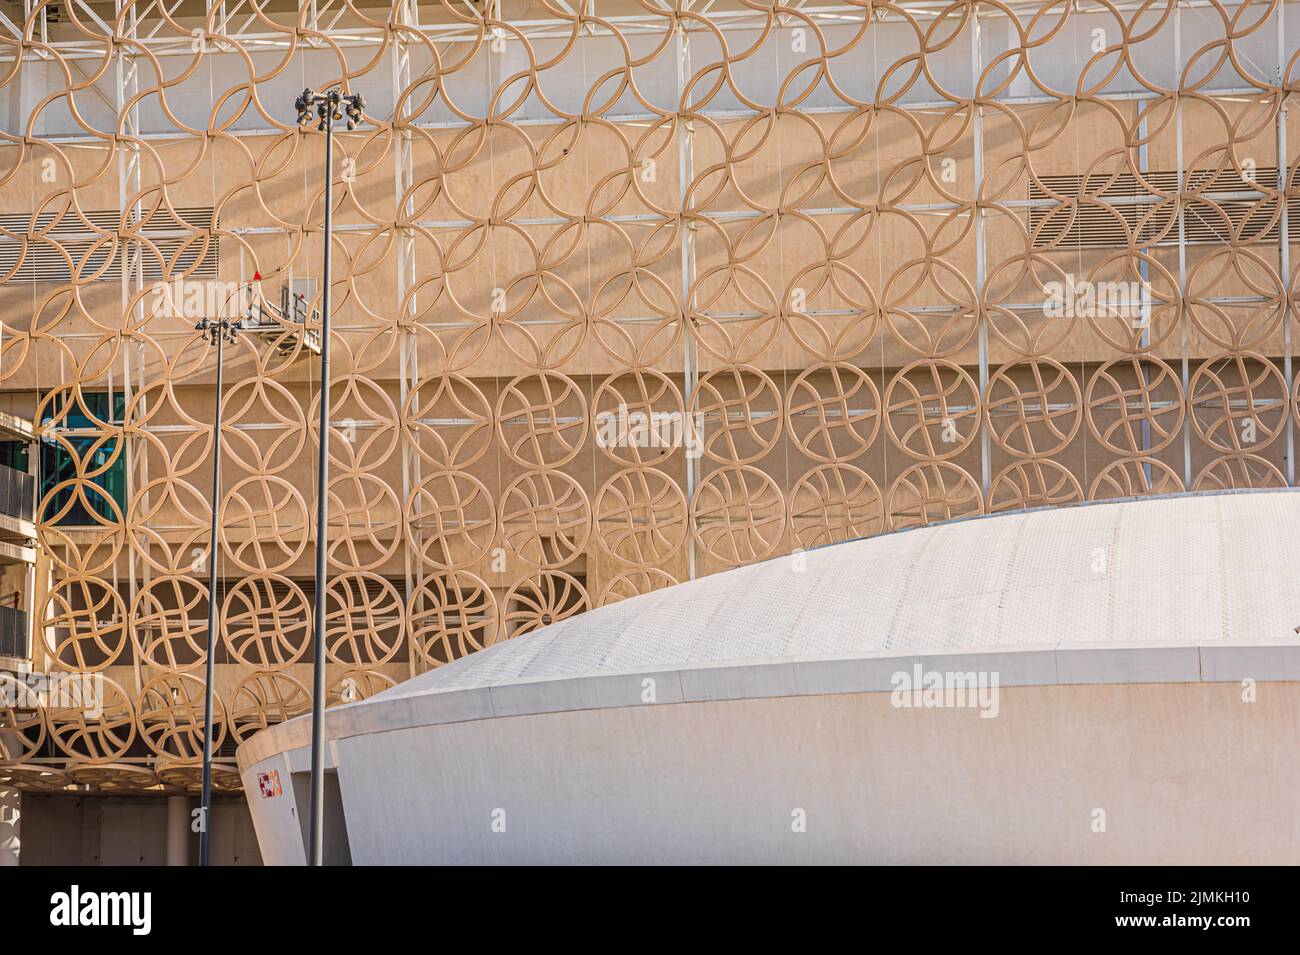 Ahmad Bin Ali Stadium will host games in Qatar for the 2022 for FIFA World Cup Stock Photo